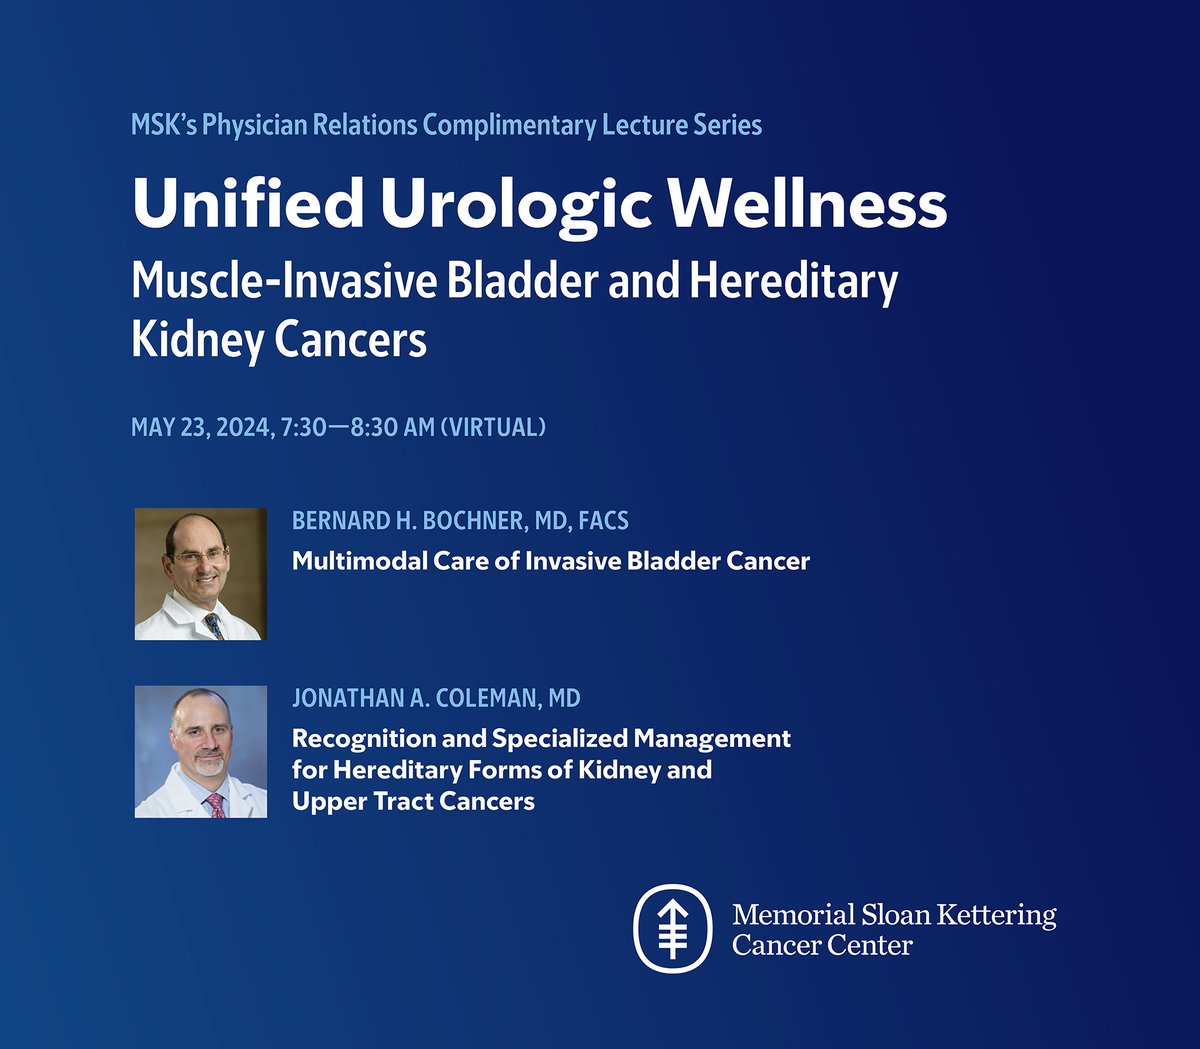 Don't miss our complimentary lecture next week hosted by the @MSKCancerCenter Physician Relations Team! Explore recent updates in muscle-invasive #bladdercancer & specialized approaches for hereditary #kidney & upper-tract cancers. Free registration ▶️ bit.ly/UroWellness